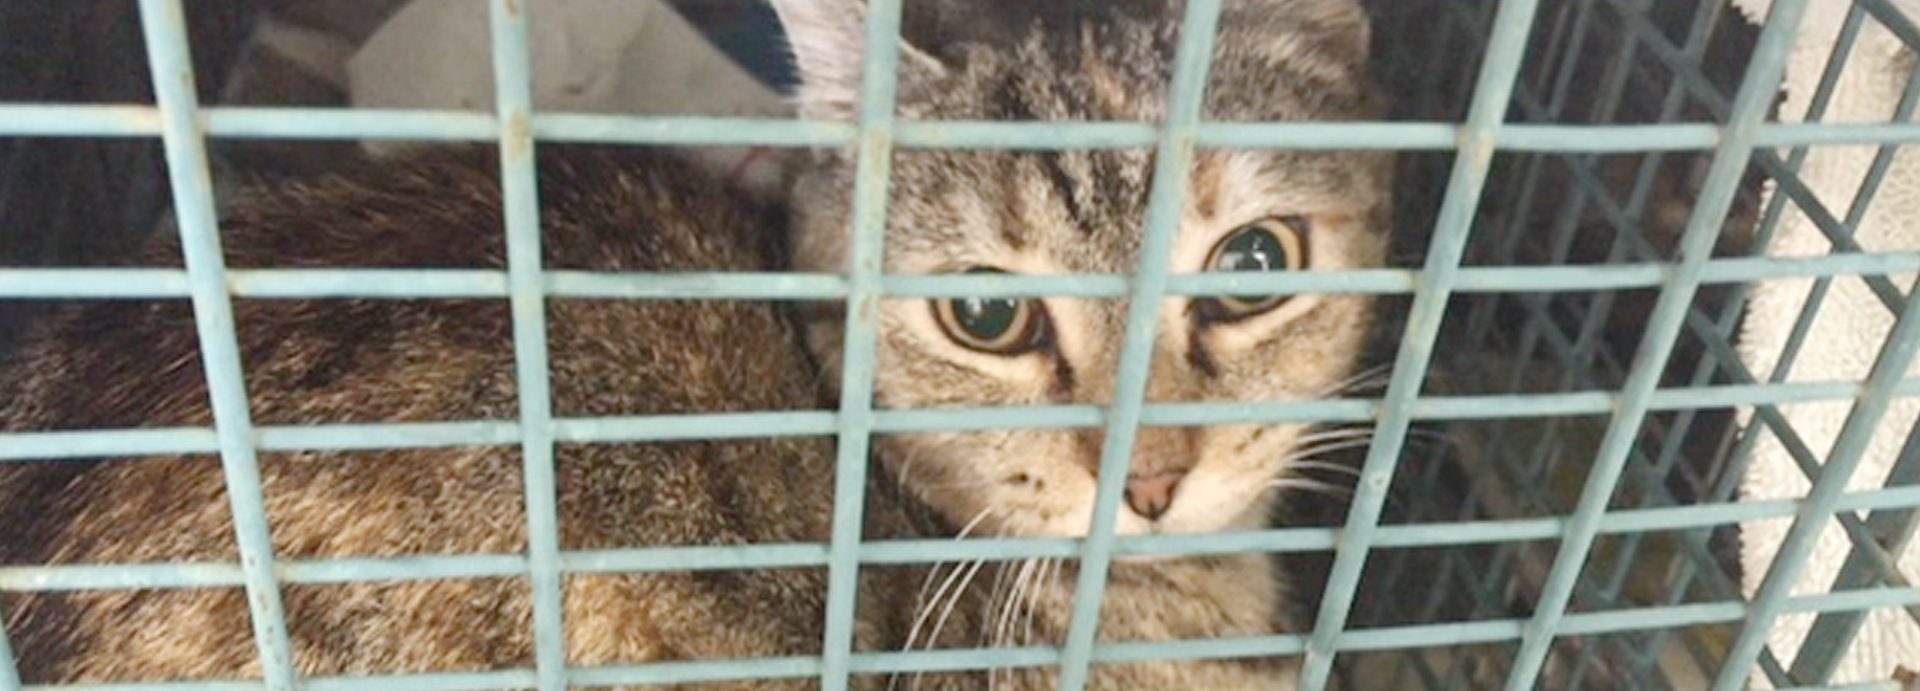 Delaware bill ordering research labs to release retired cats & dogs passes Senate